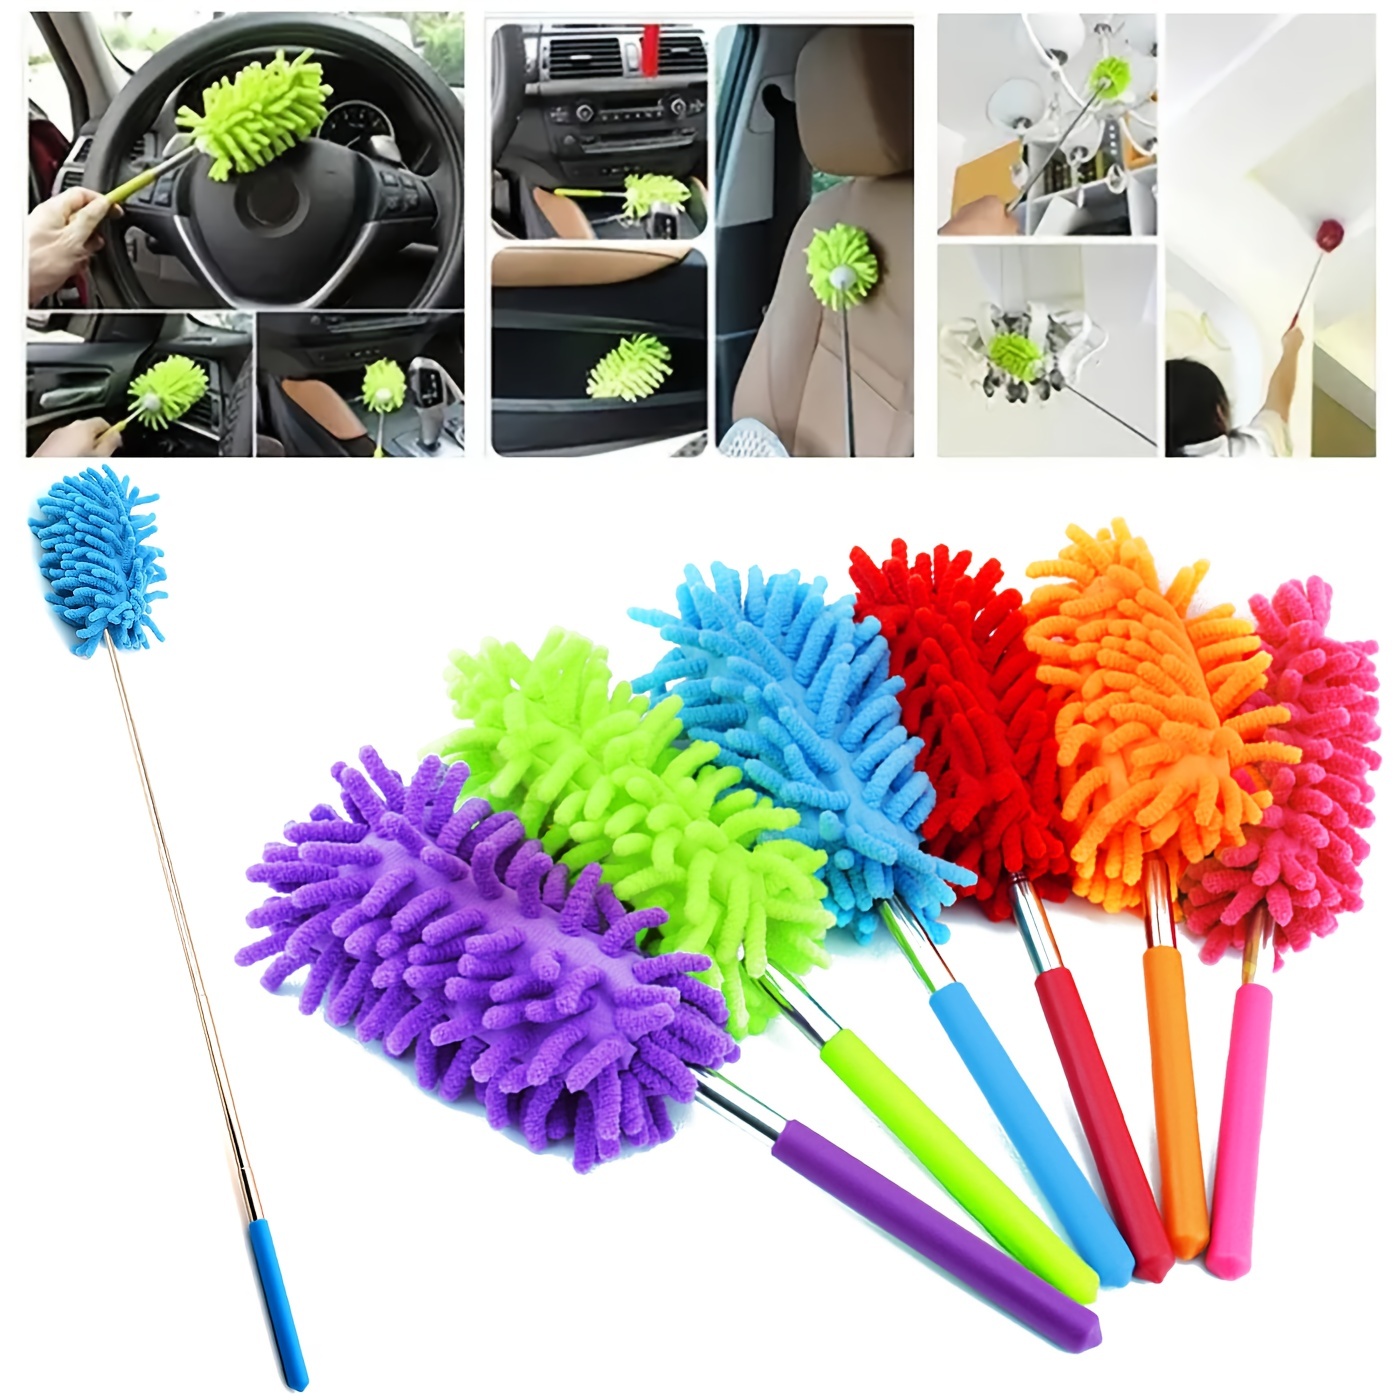 Microfiber Duster for Cleaning, Tukuos Hand Washable Dusters with 2pcs  Replaceable Microfiber Head, Extendable Pole, Detachable Cleaning Supplies  for